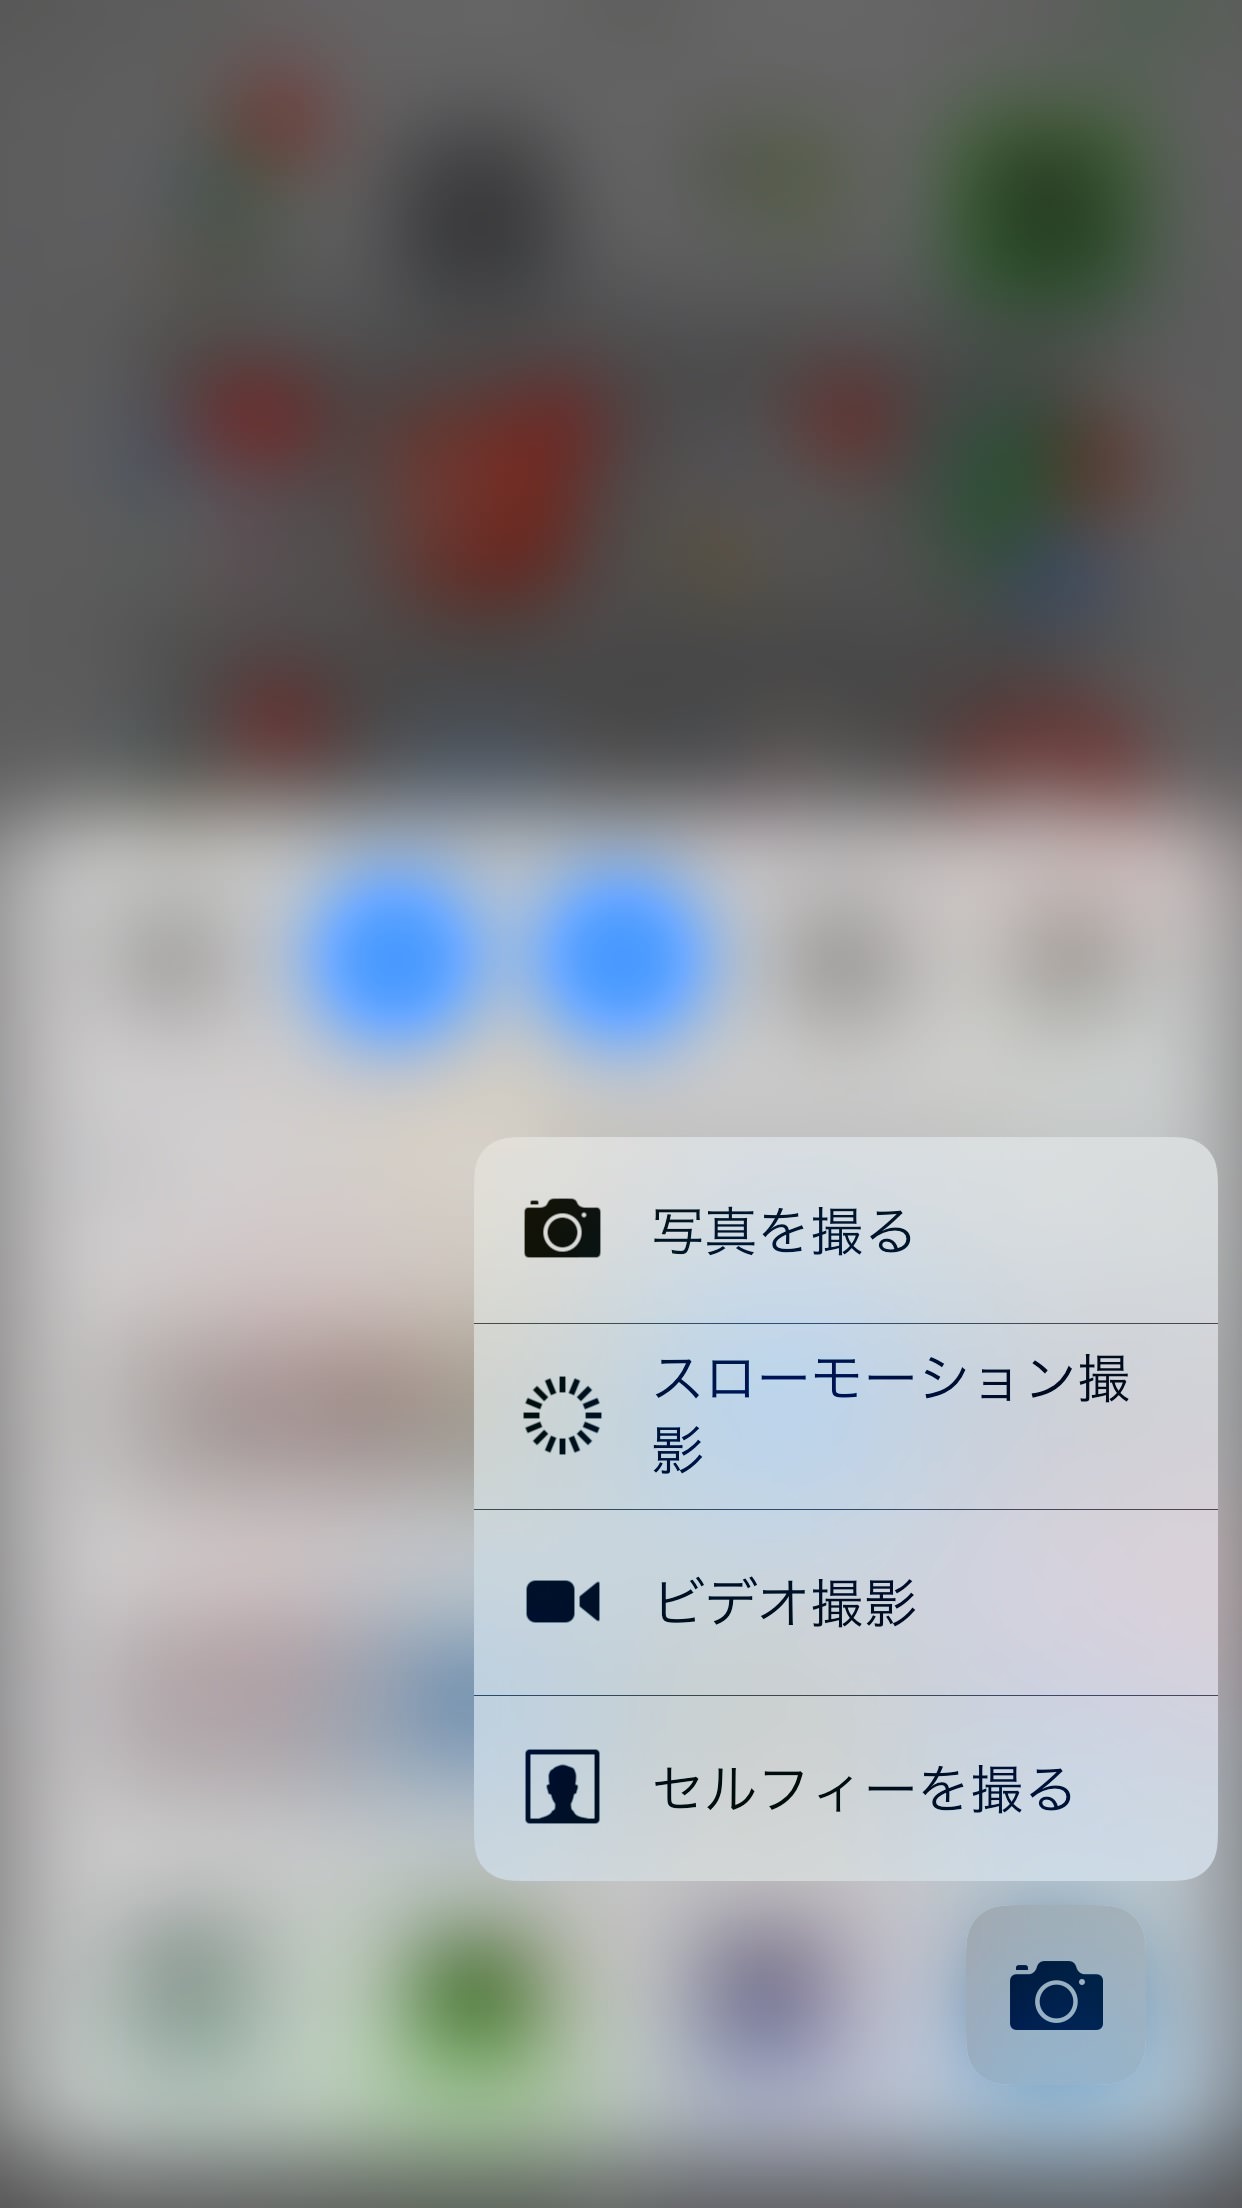 iphone-controlcenter-3dtouch